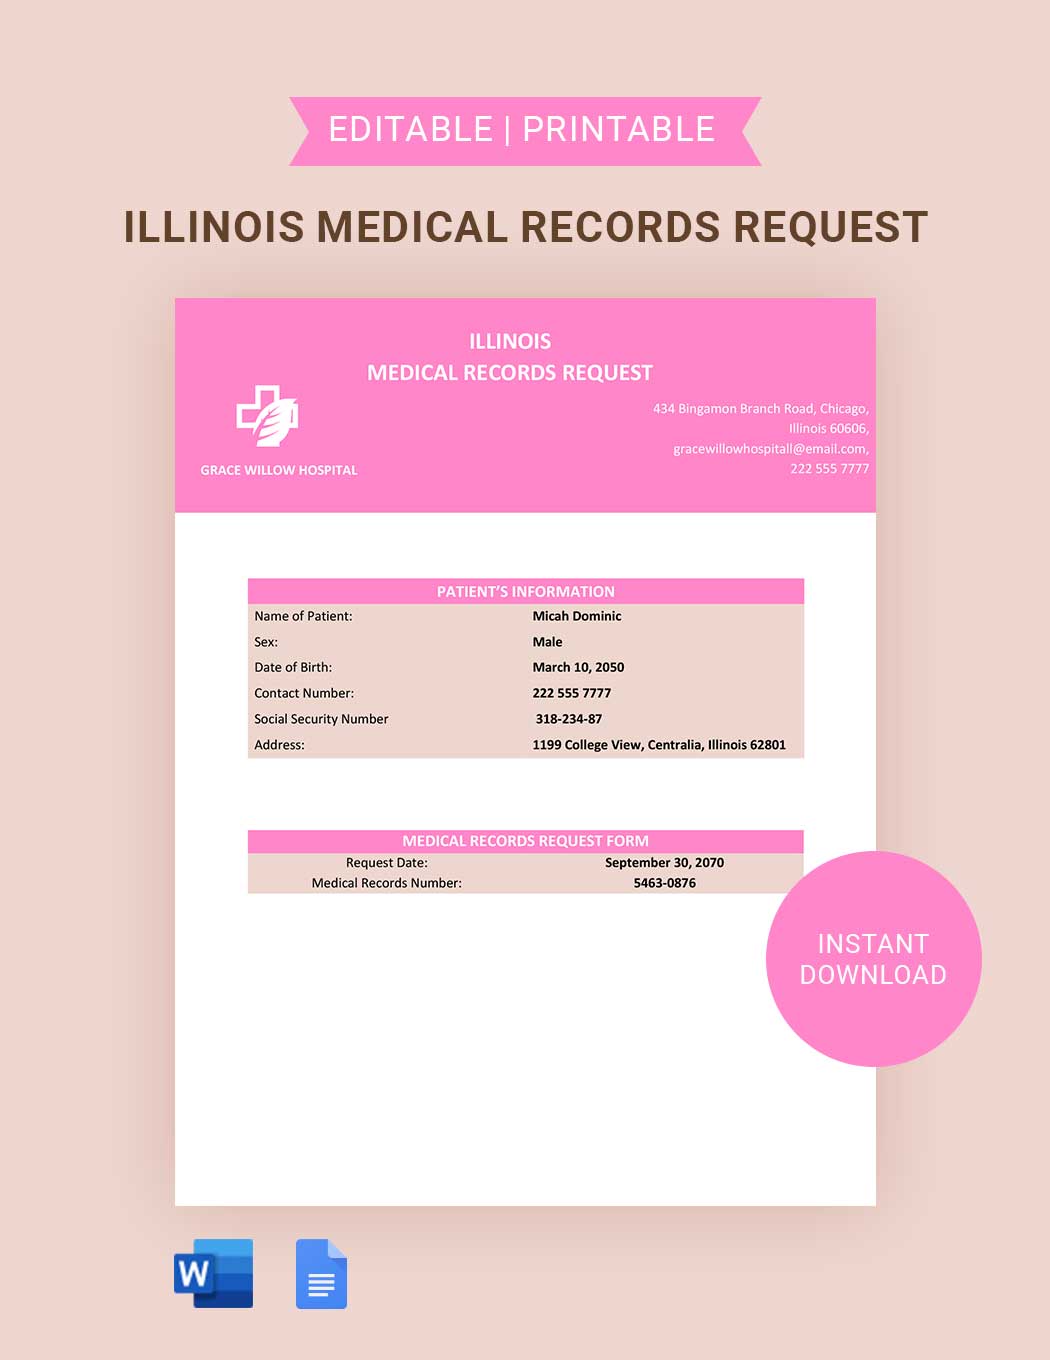 Illinois Medical Records Request Template in Word, Google Docs